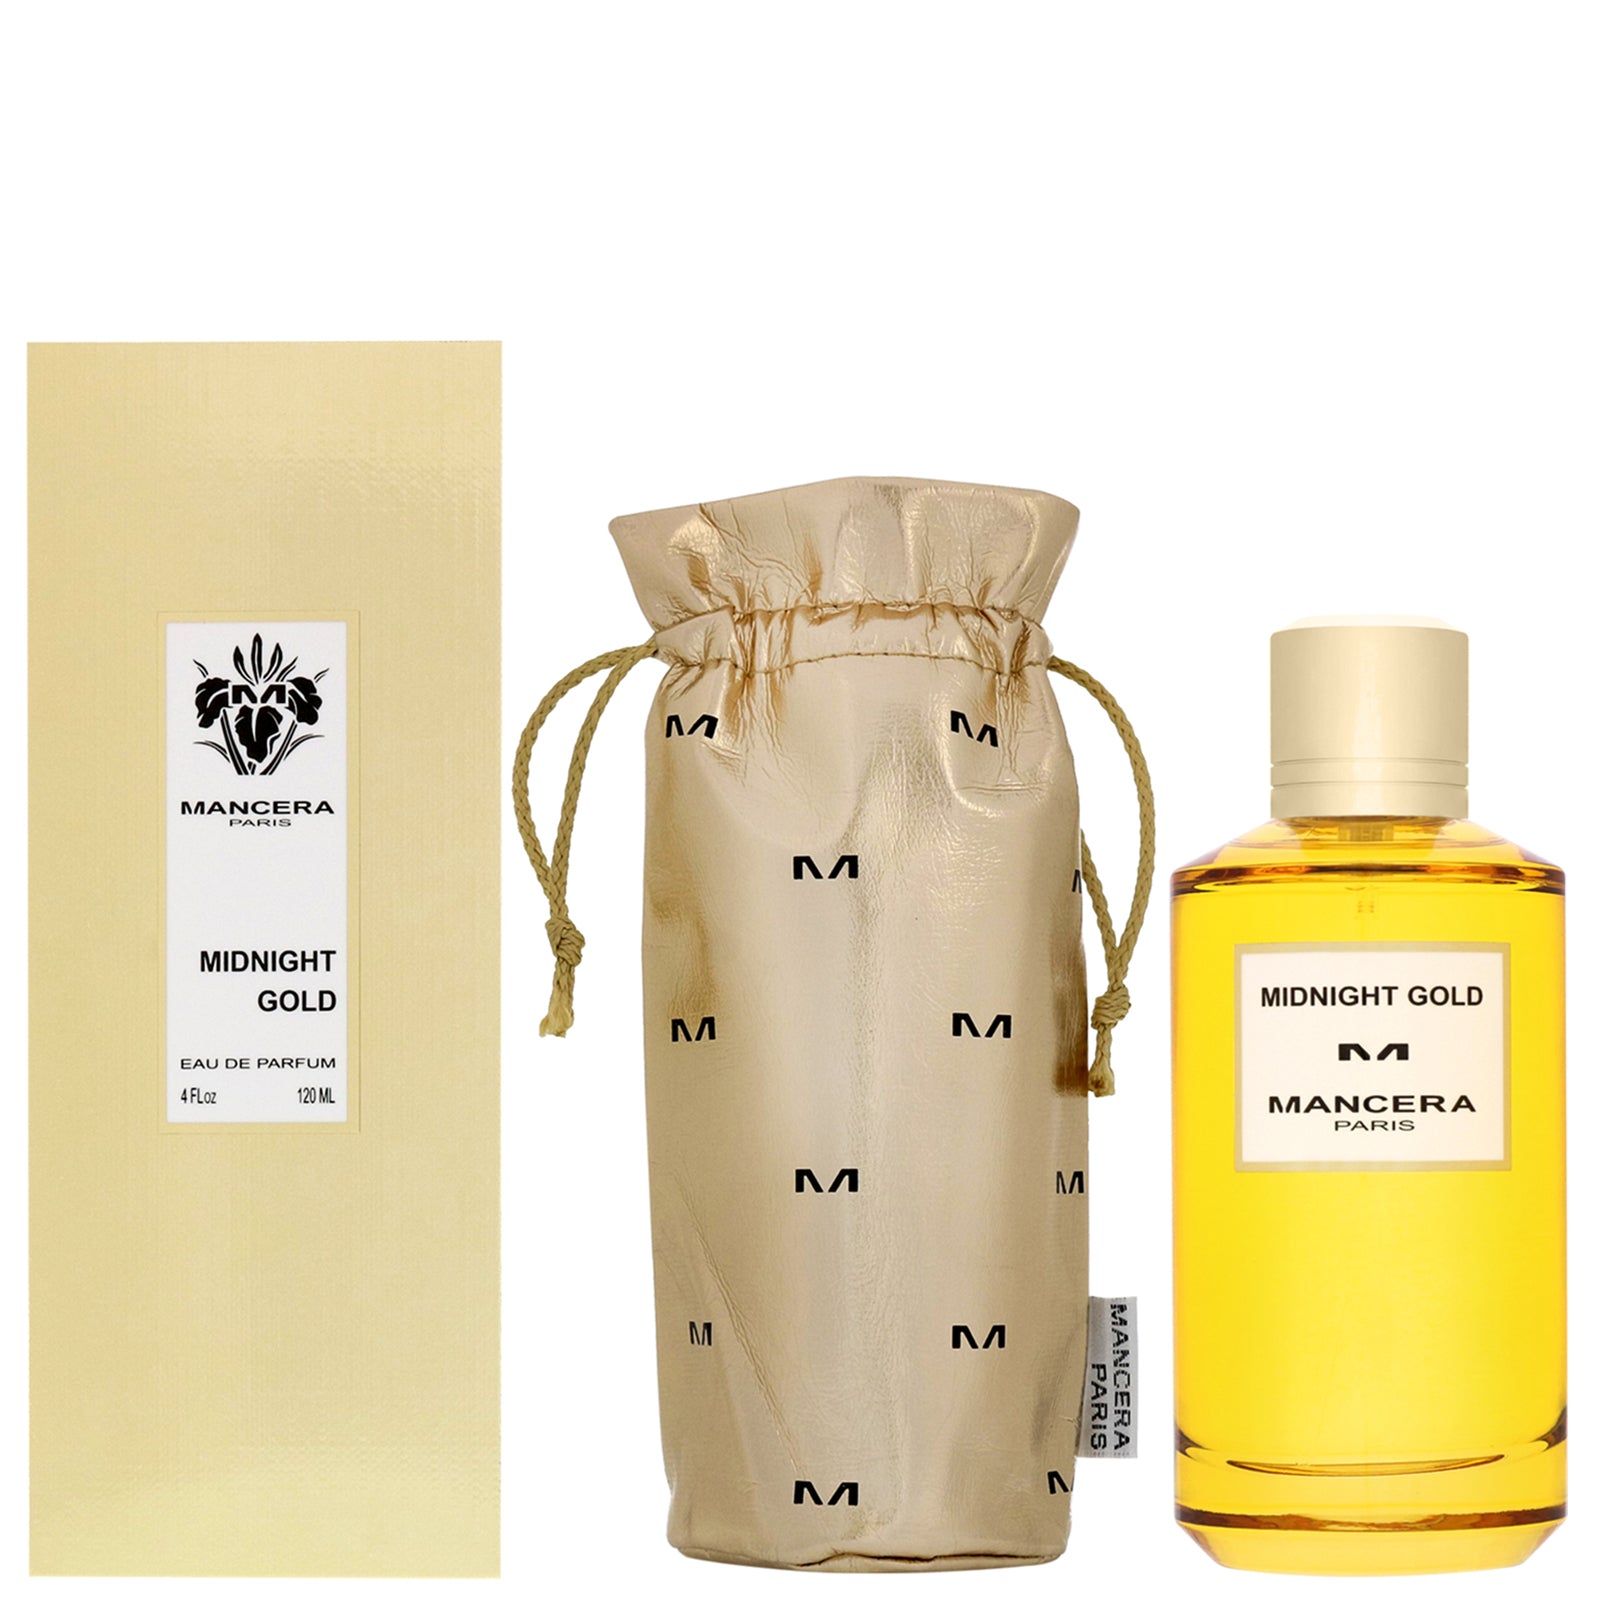 <span data-mce-fragment="1">From the Mancera collection. A luminous and fascinating perfume that opens on aromatic and solar notes, and settles gently on woody notes that enchant the soul. Midnight gold, a secret rendezvous not to be missed. 4 oz. Made in France.</span><br data-mce-fragment="1"><br data-mce-fragment="1"><b data-mce-fragment="1">TOP NOTES</b>
<ul data-mce-fragment="1">
<li data-mce-fragment="1">Mandarin orange</li>
<li data-mce-fragment="1">Lime</li>
<li data-mce-fragment="1">Neroli</li>
<li data-mce-fragment="1">Black pepper</li>
<li data-mce-fragment="1">Cardamom</li>
<li data-mce-fragment="1">Rosemary</li>
</ul>
<br data-mce-fragment="1"><b data-mce-fragment="1">HEART NOTES</b>
<ul data-mce-fragment="1">
<li data-mce-fragment="1">Turkish rose</li>
<li data-mce-fragment="1">Cedar</li>
<li data-mce-fragment="1">Patchouli leaf</li>
</ul>
<br data-mce-fragment="1"><b data-mce-fragment="1">BASE NOTES</b>
<ul data-mce-fragment="1">
<li data-mce-fragment="1">White musk</li>
<li data-mce-fragment="1">Amber</li>
<li data-mce-fragment="1">Agarwood</li>
<li data-mce-fragment="1">Oakmoss</li>
</ul>